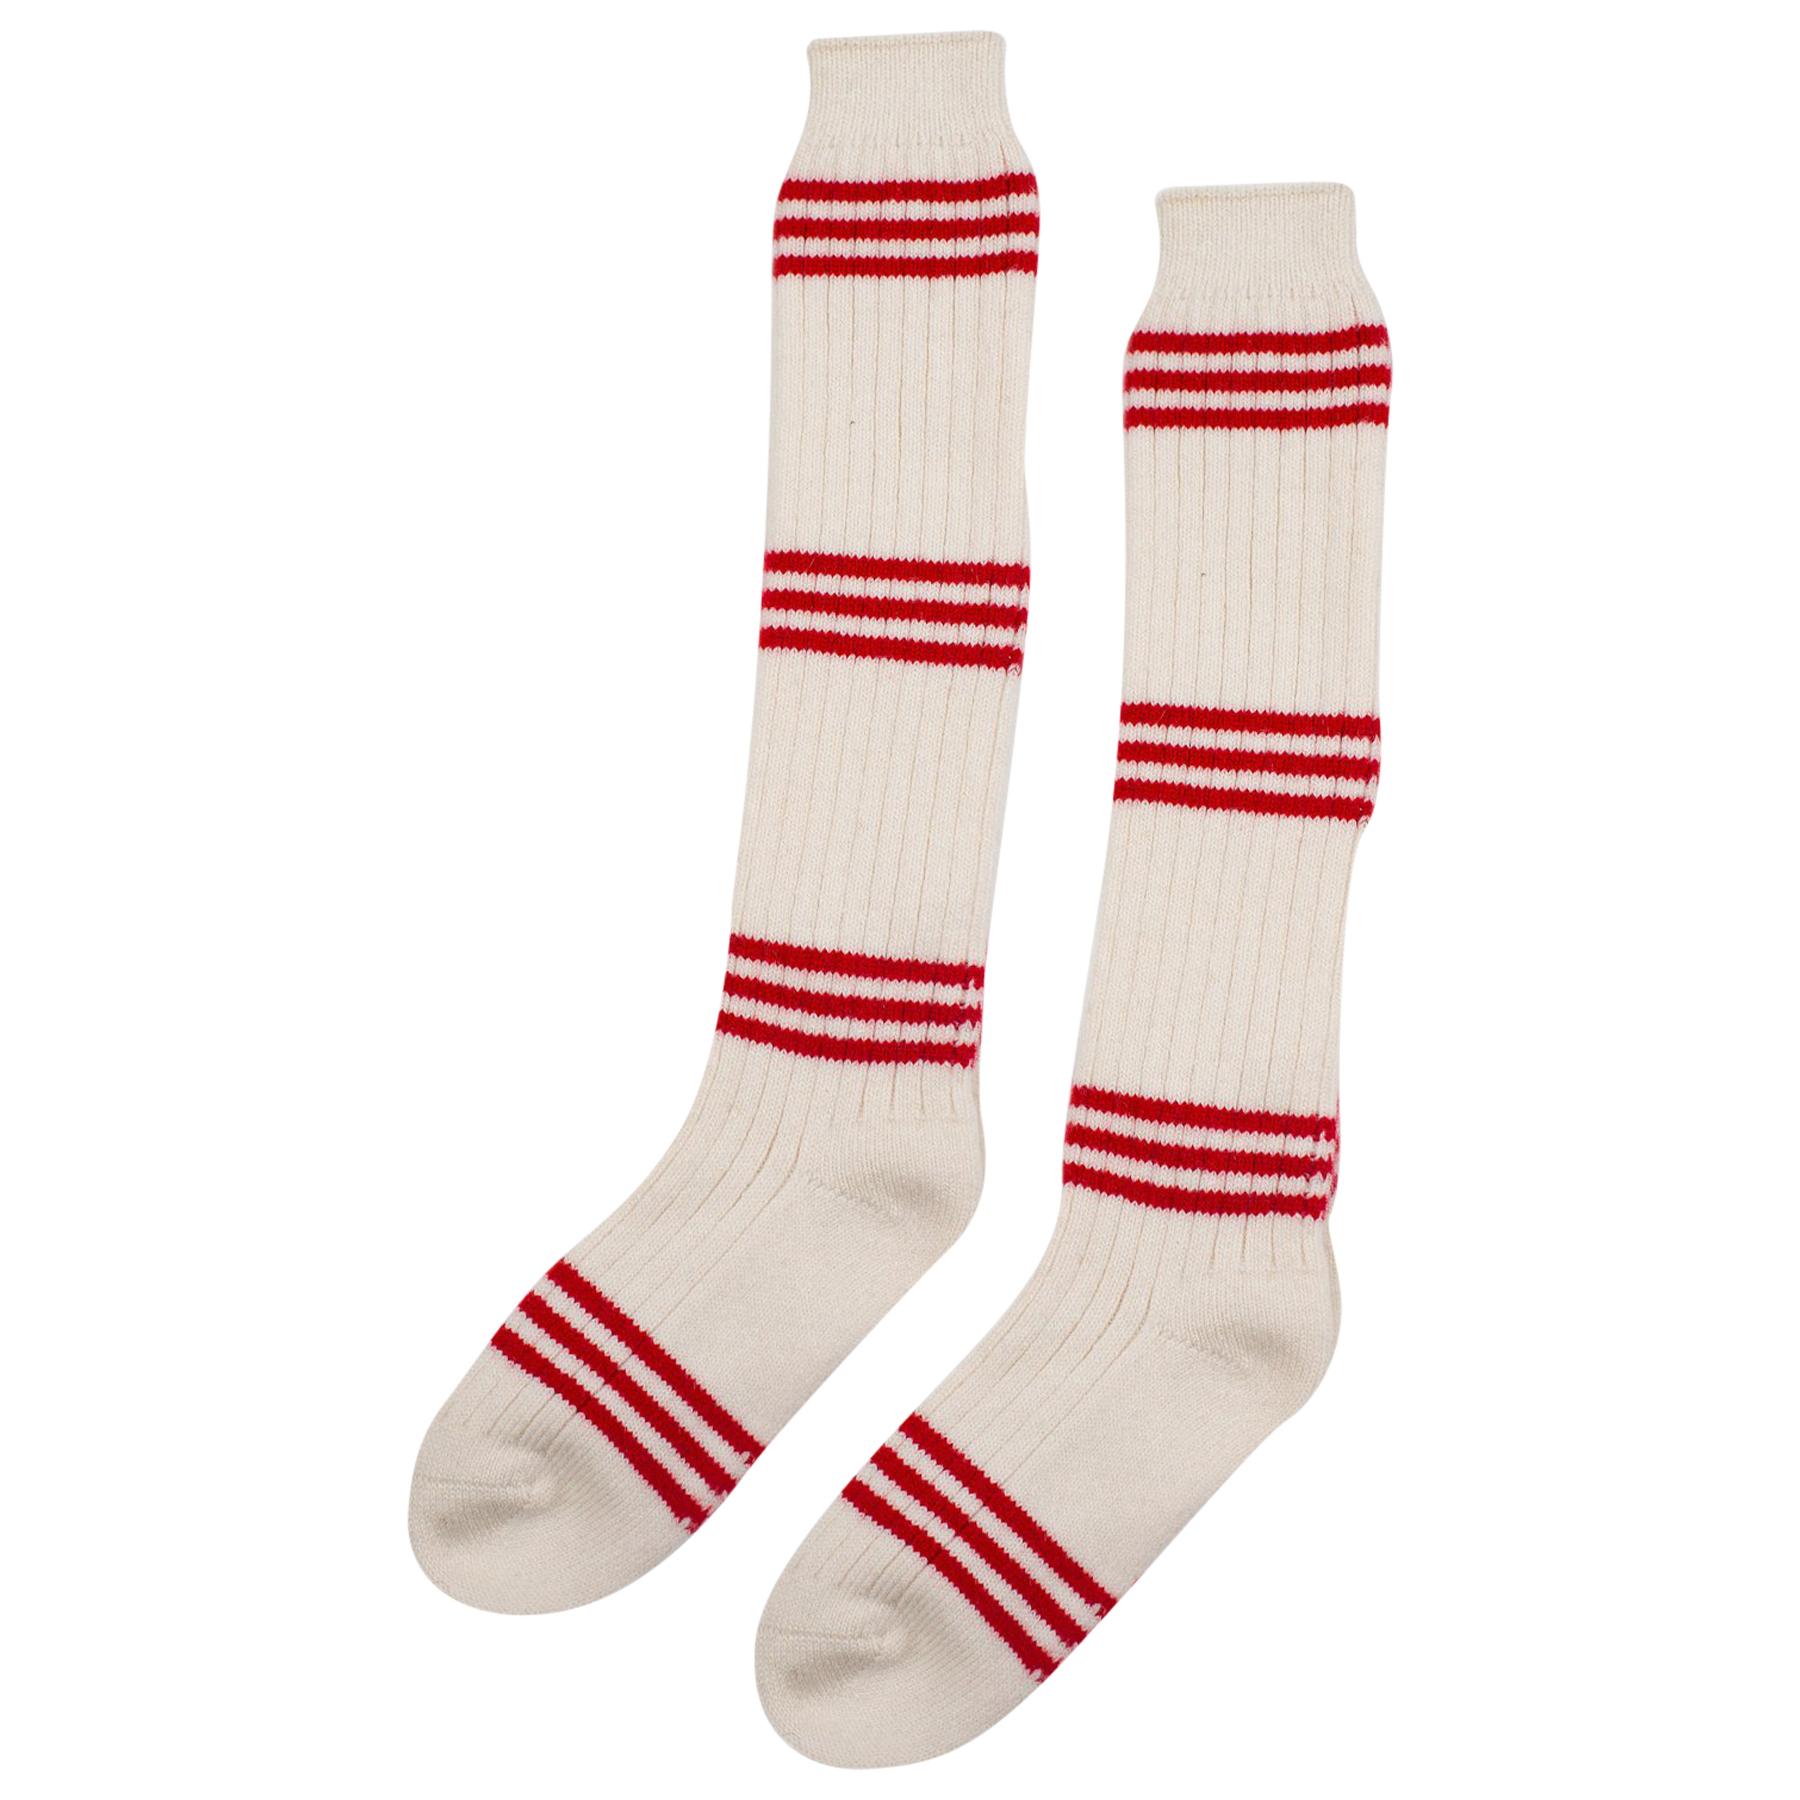 Pair of Striped Cashmere Tube Socks by Saved, New York